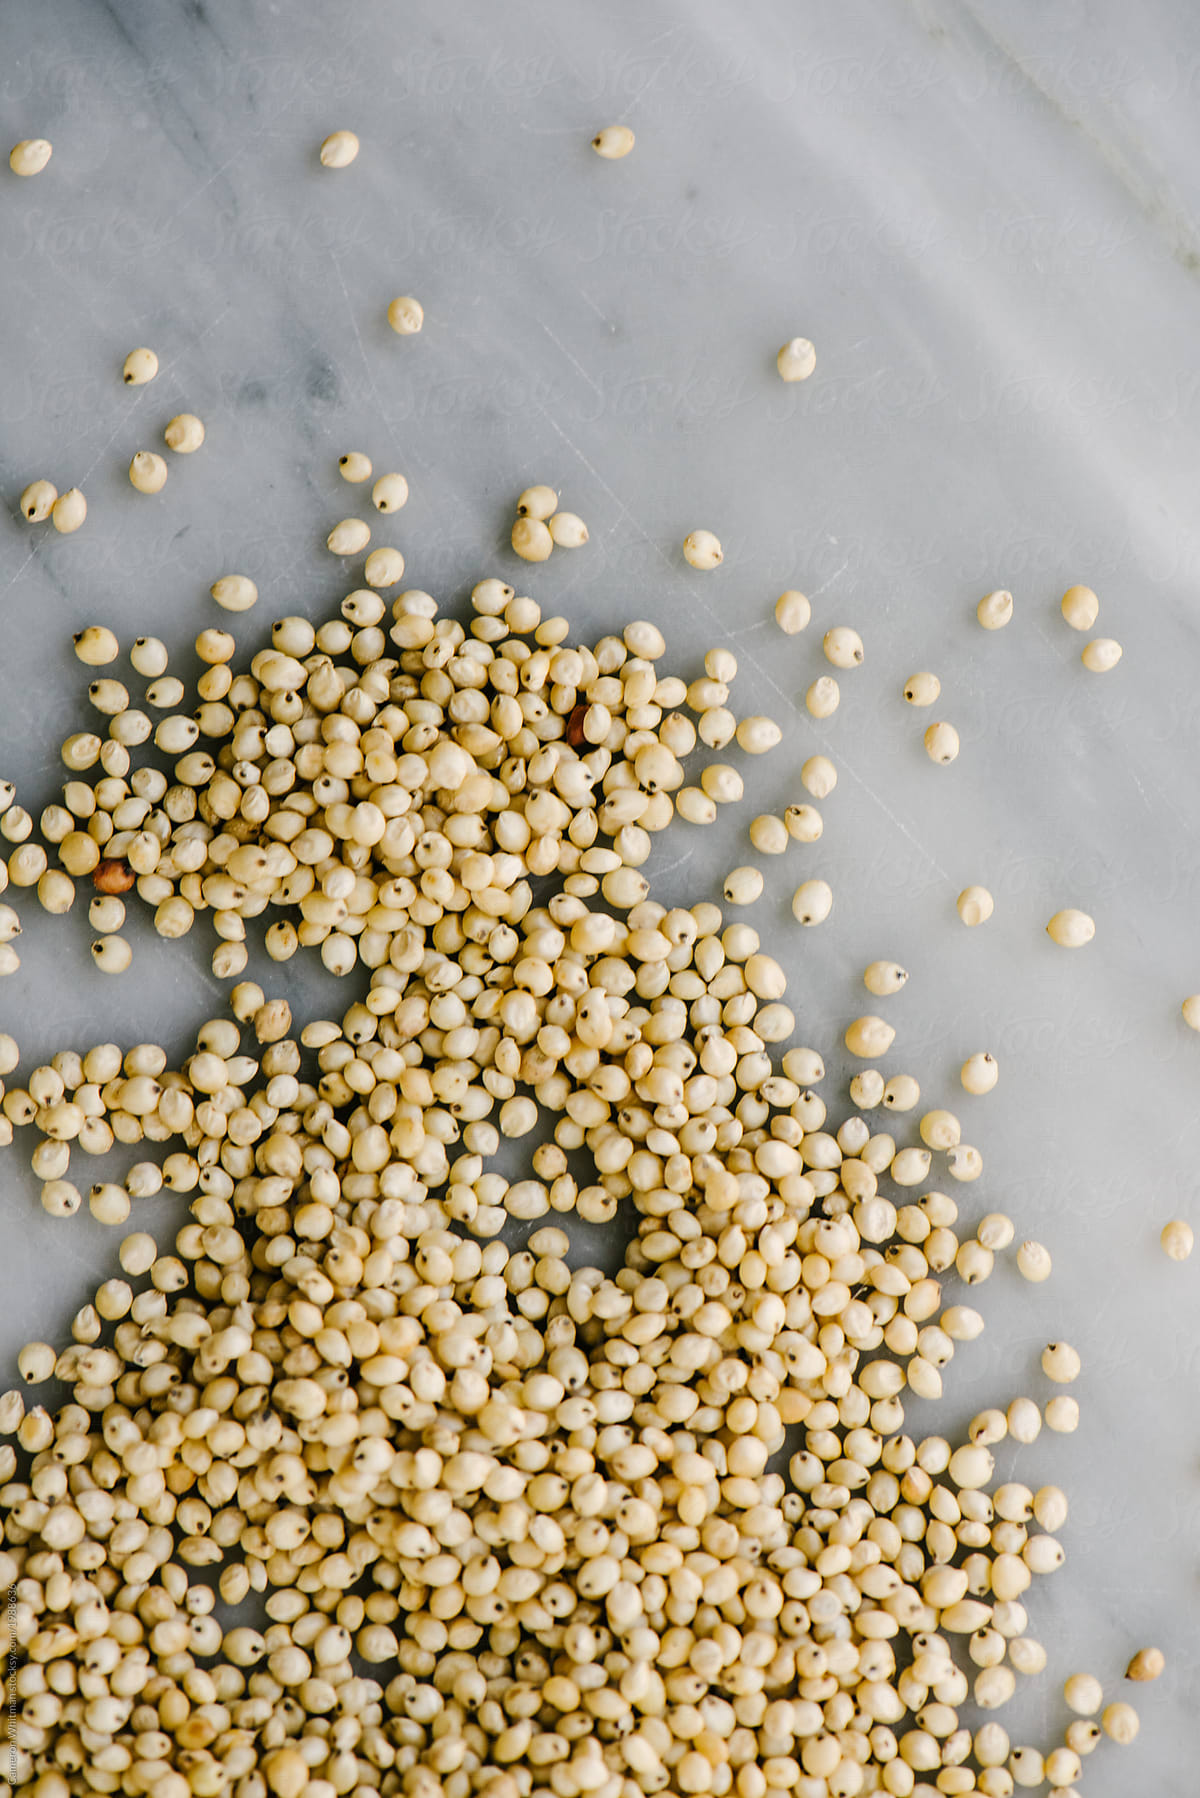 Stock photo of Sorghum seeds ready to eat